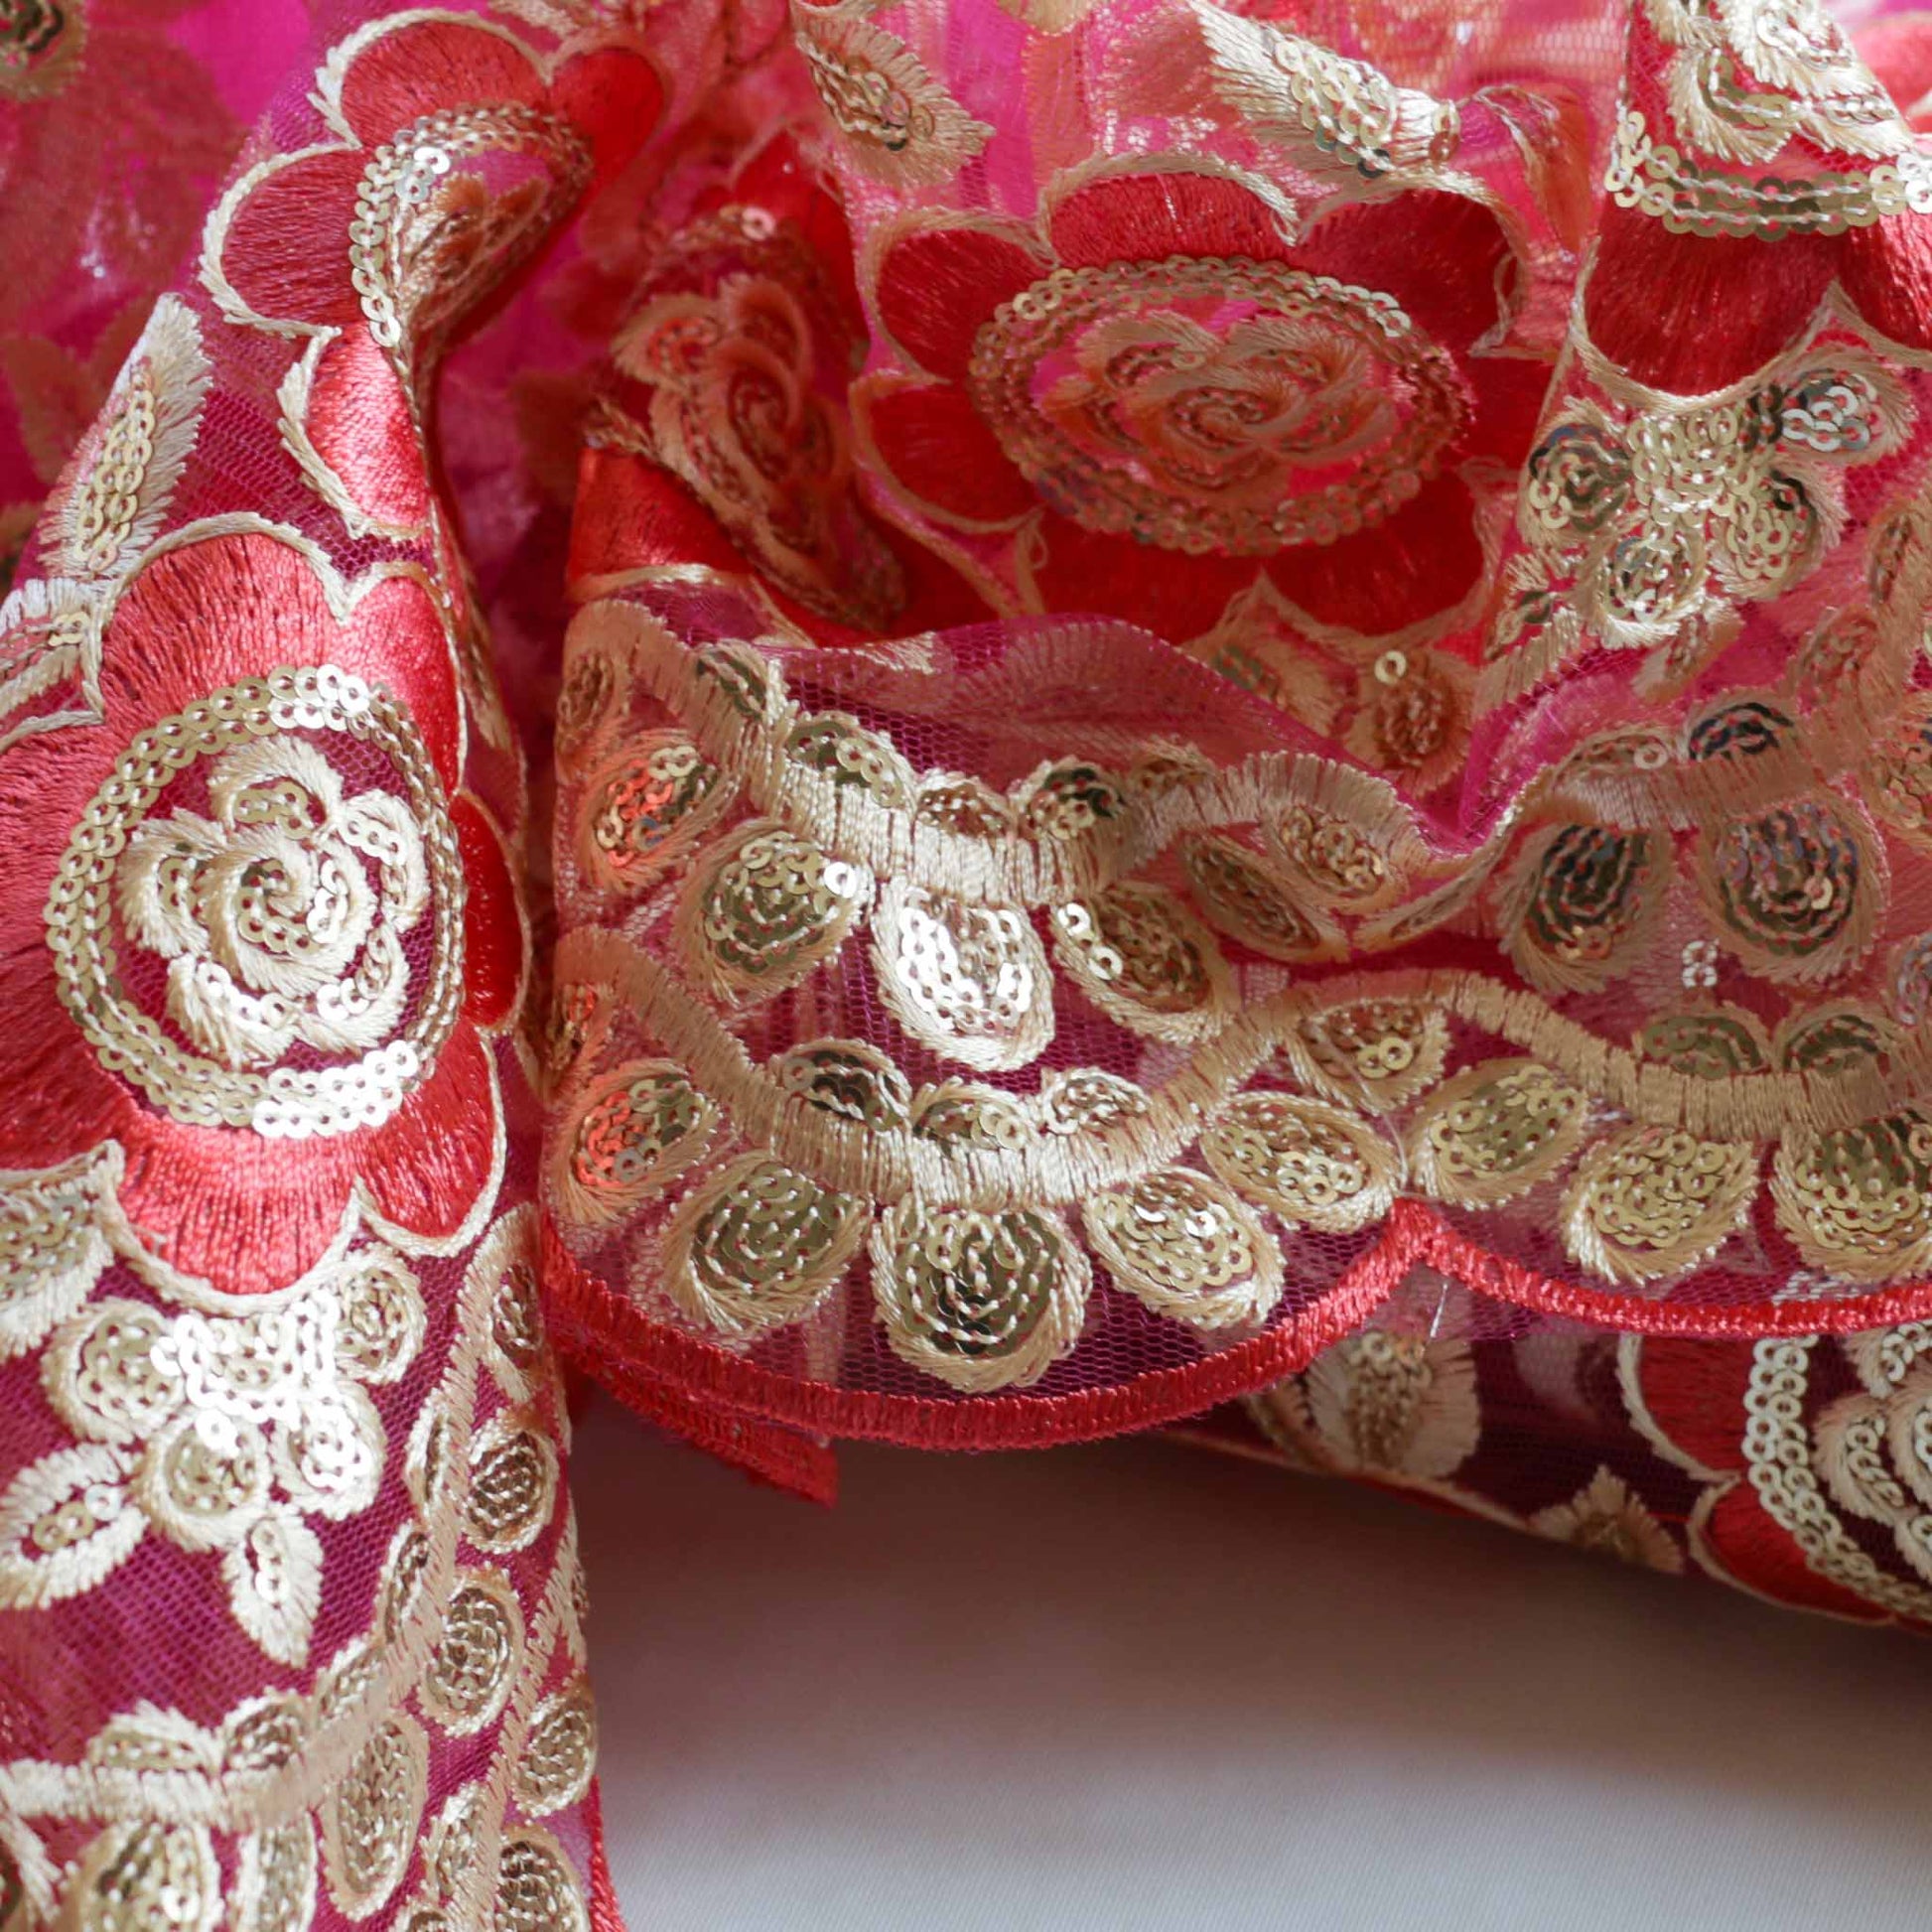 elegant gold embroidered pink lace Indian inspired fabric for dressmaking